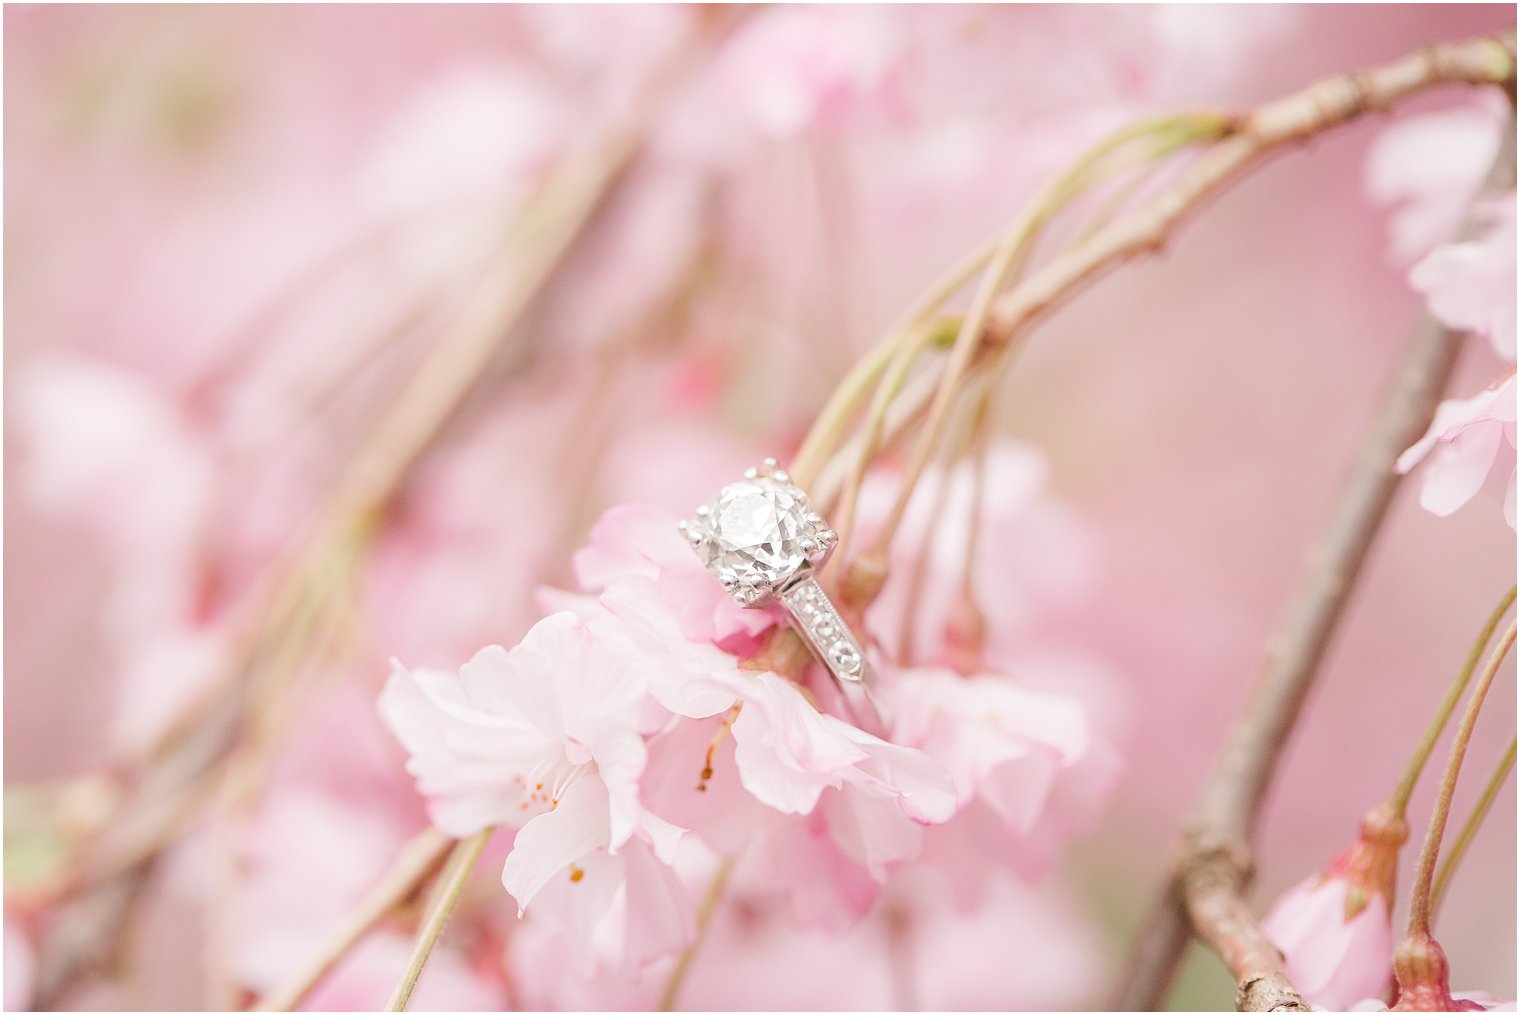 Engagement ring in cherry blossoms